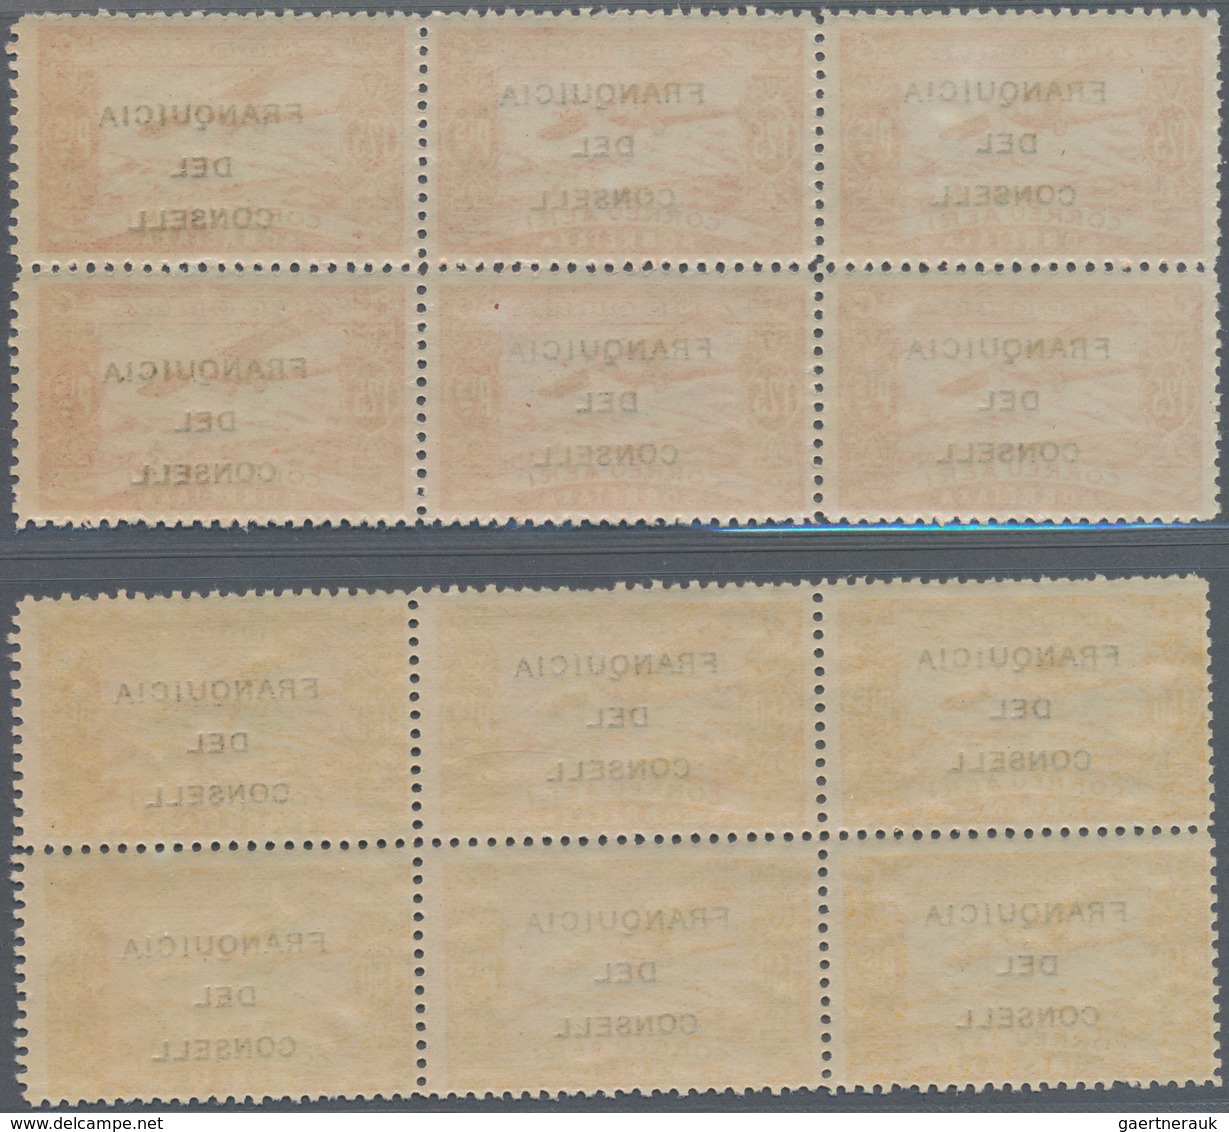 Andorra - Spanische Post: 1932, not issued airmail set of 12 with opt. 'FRANQUICIA DEL CONSELL' in b